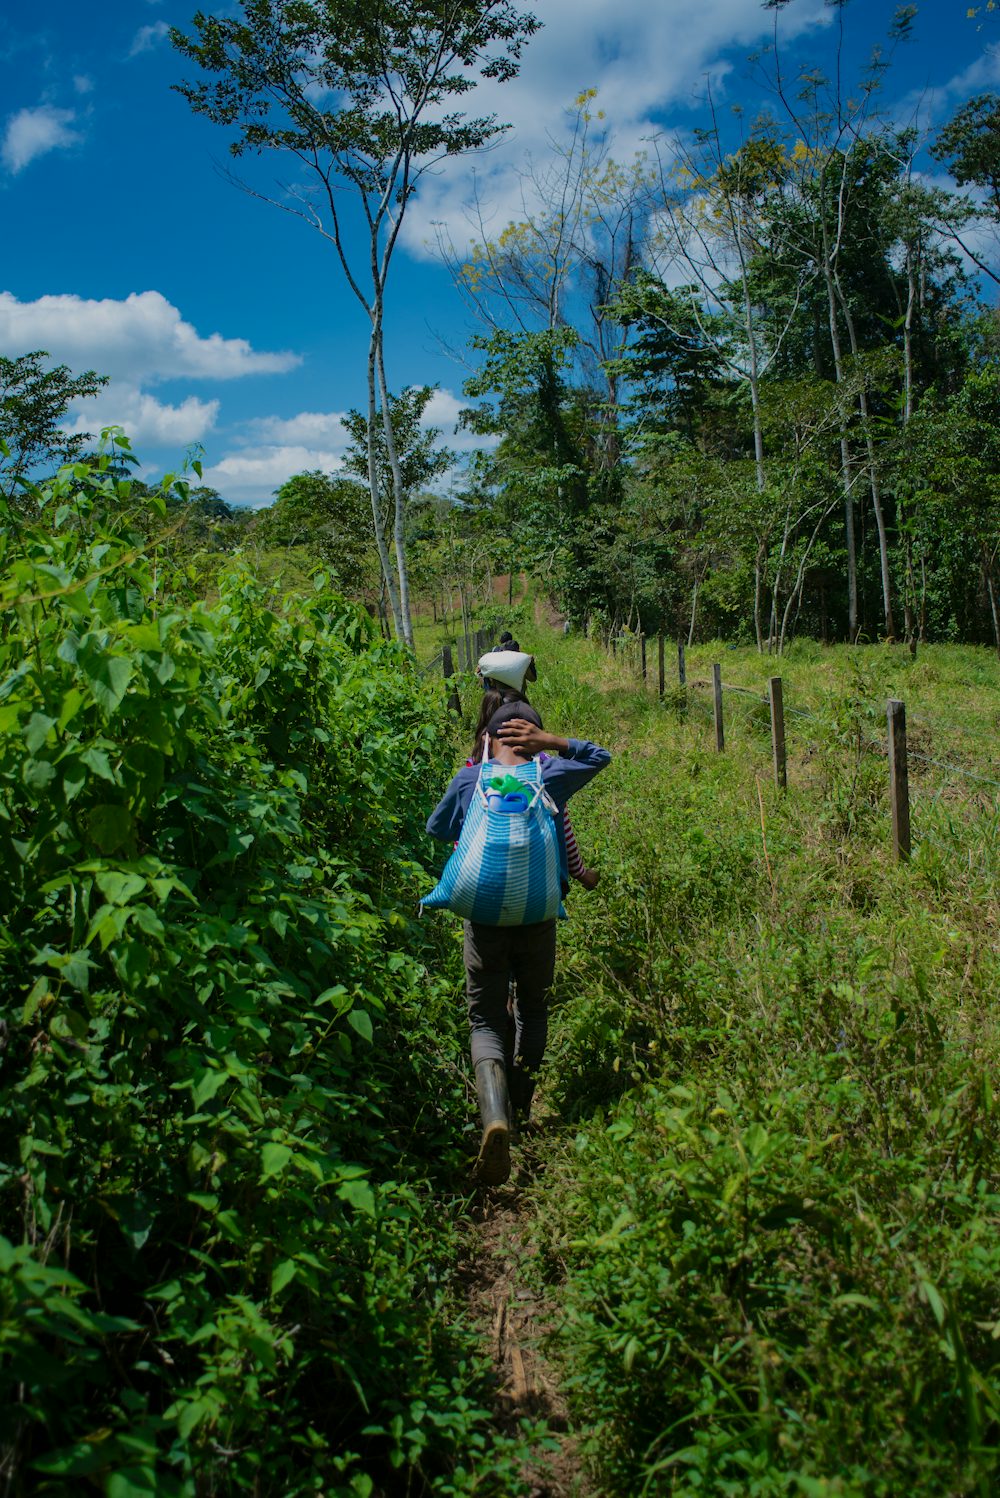 A young cardamom farmer walks down a path in a cloud forest, carrying a sack of spice on her back.